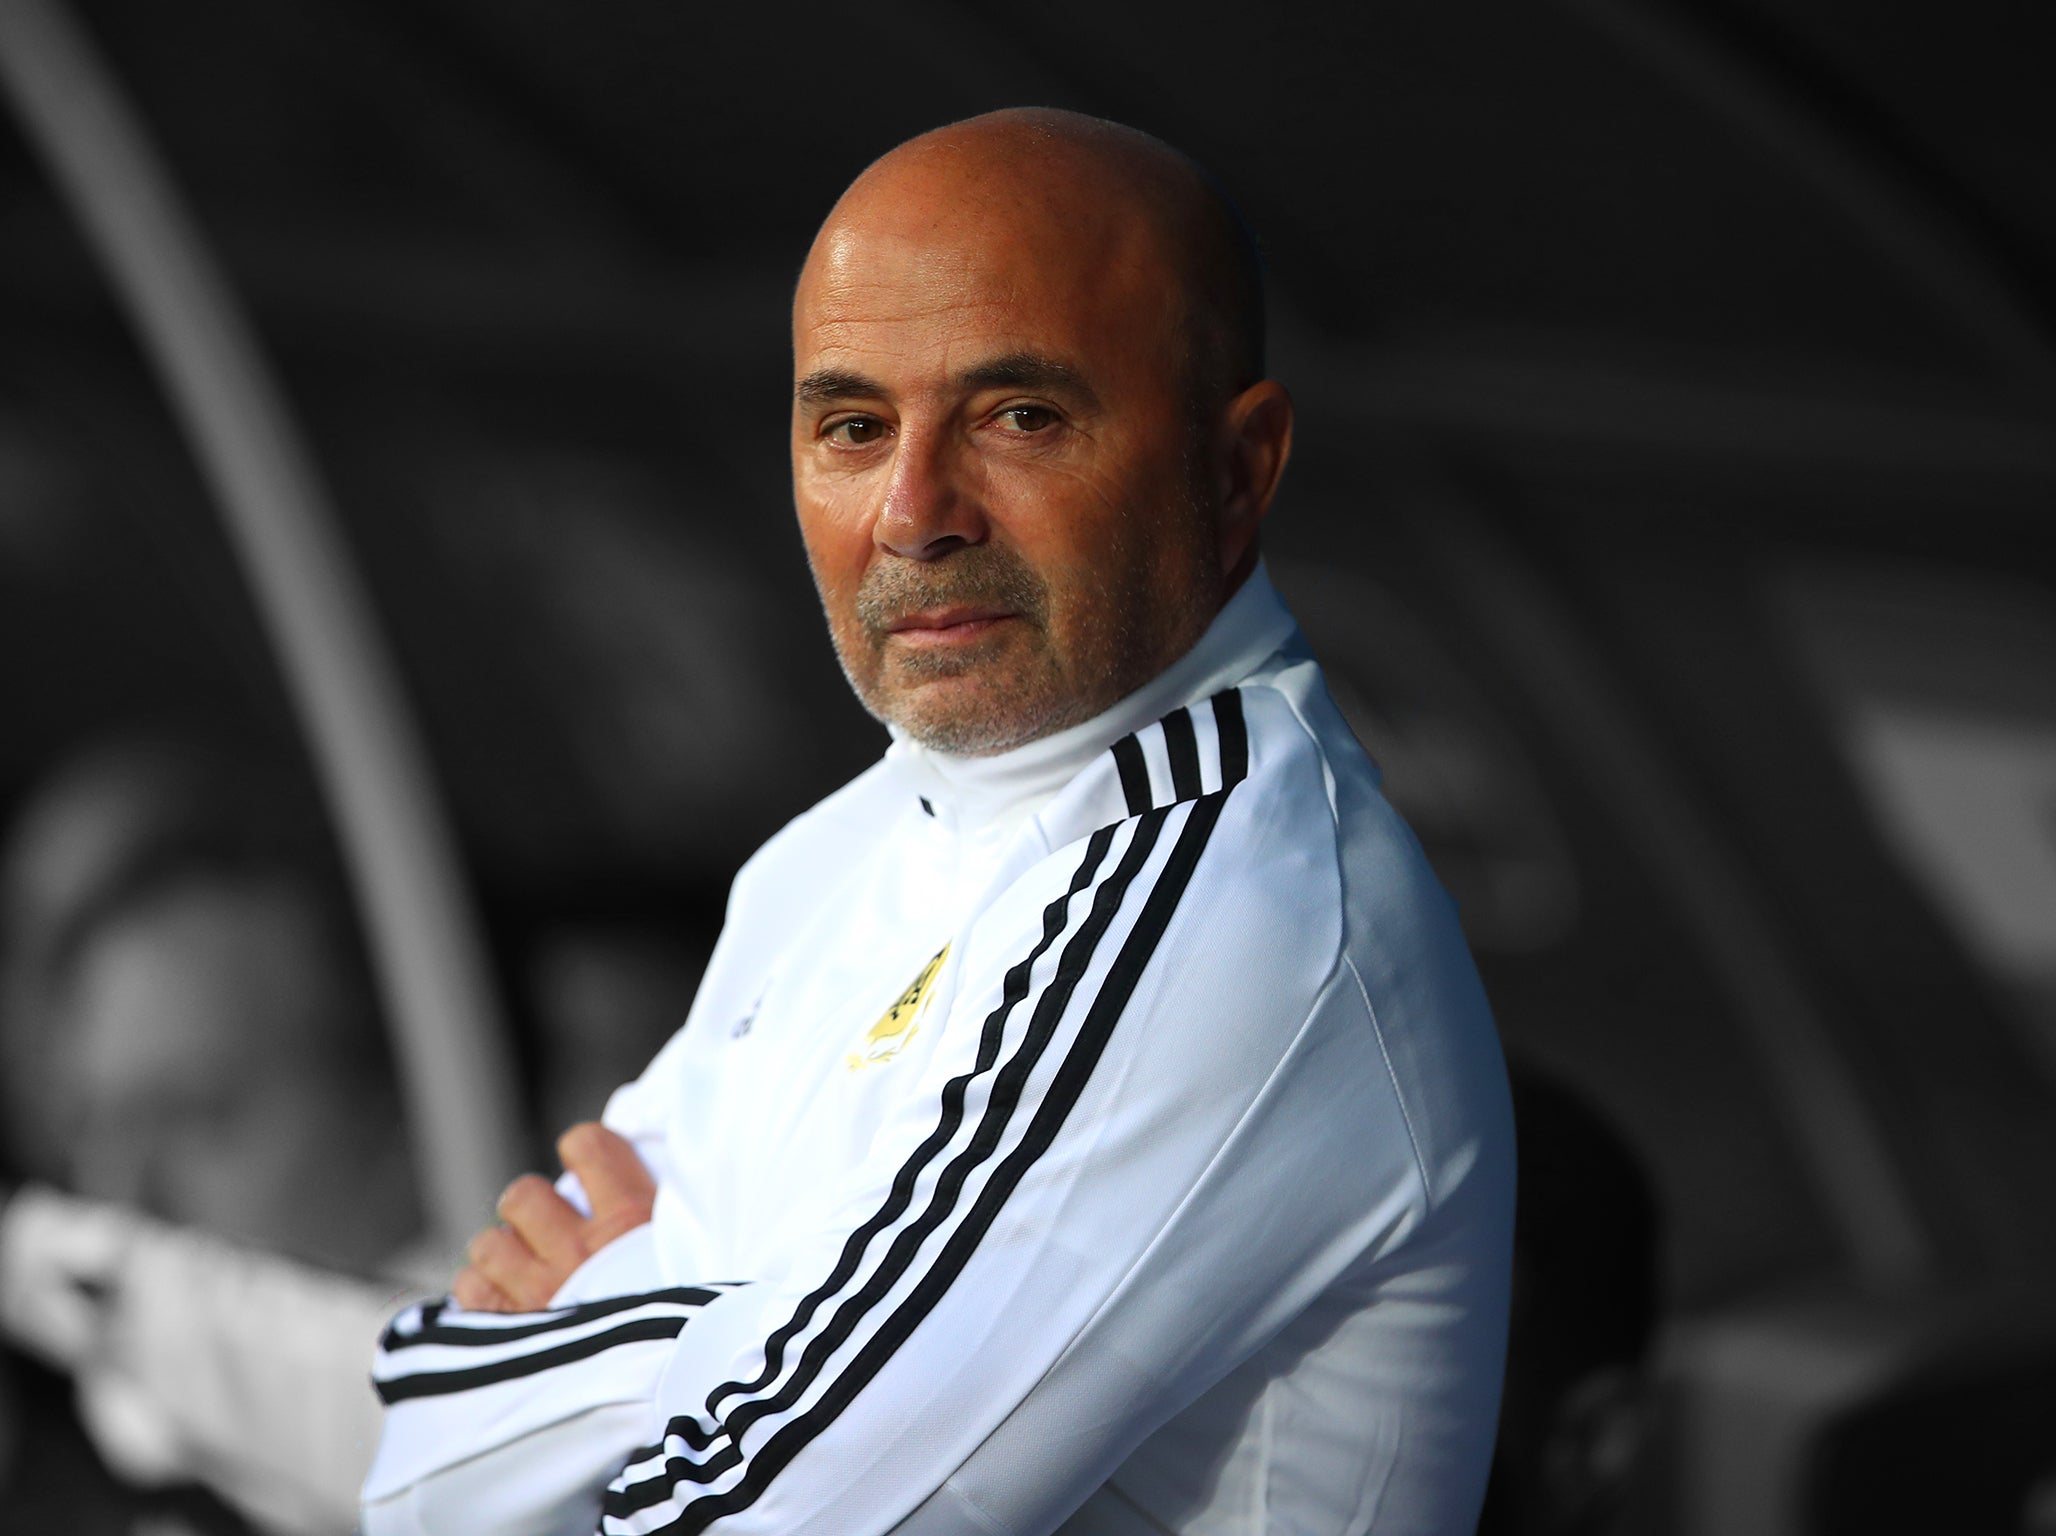 Has Jorge Sampaoli been left out in the cold?